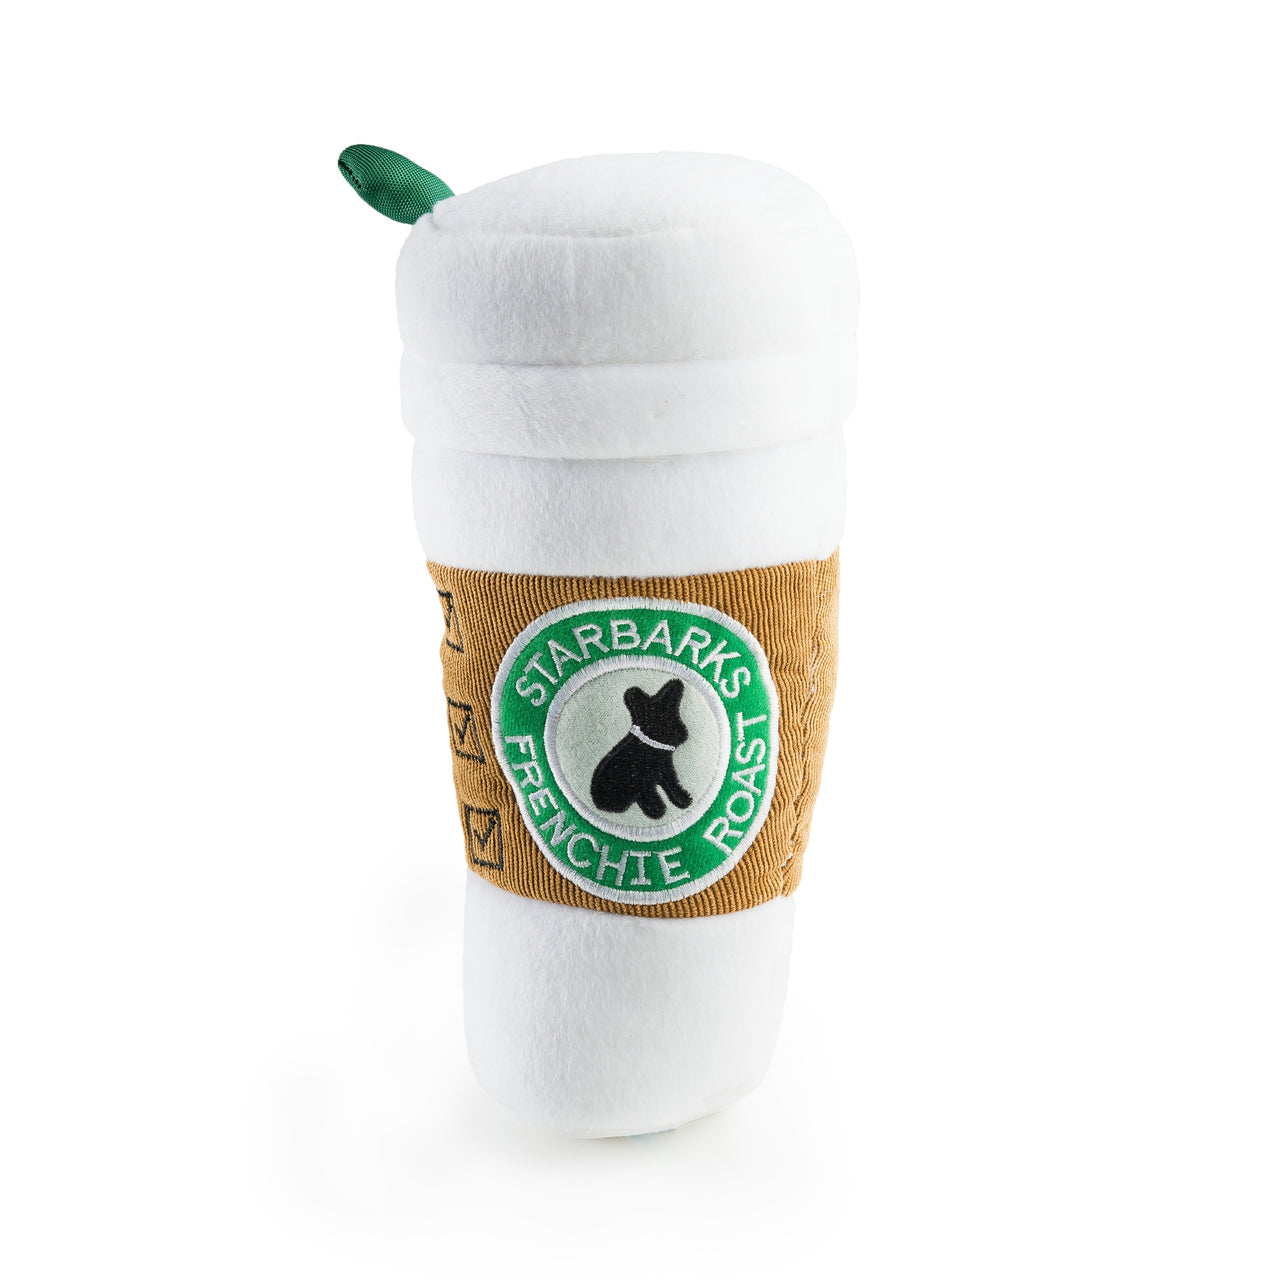 Starbarks Coffee Cup W/ Lid - Dog Toy